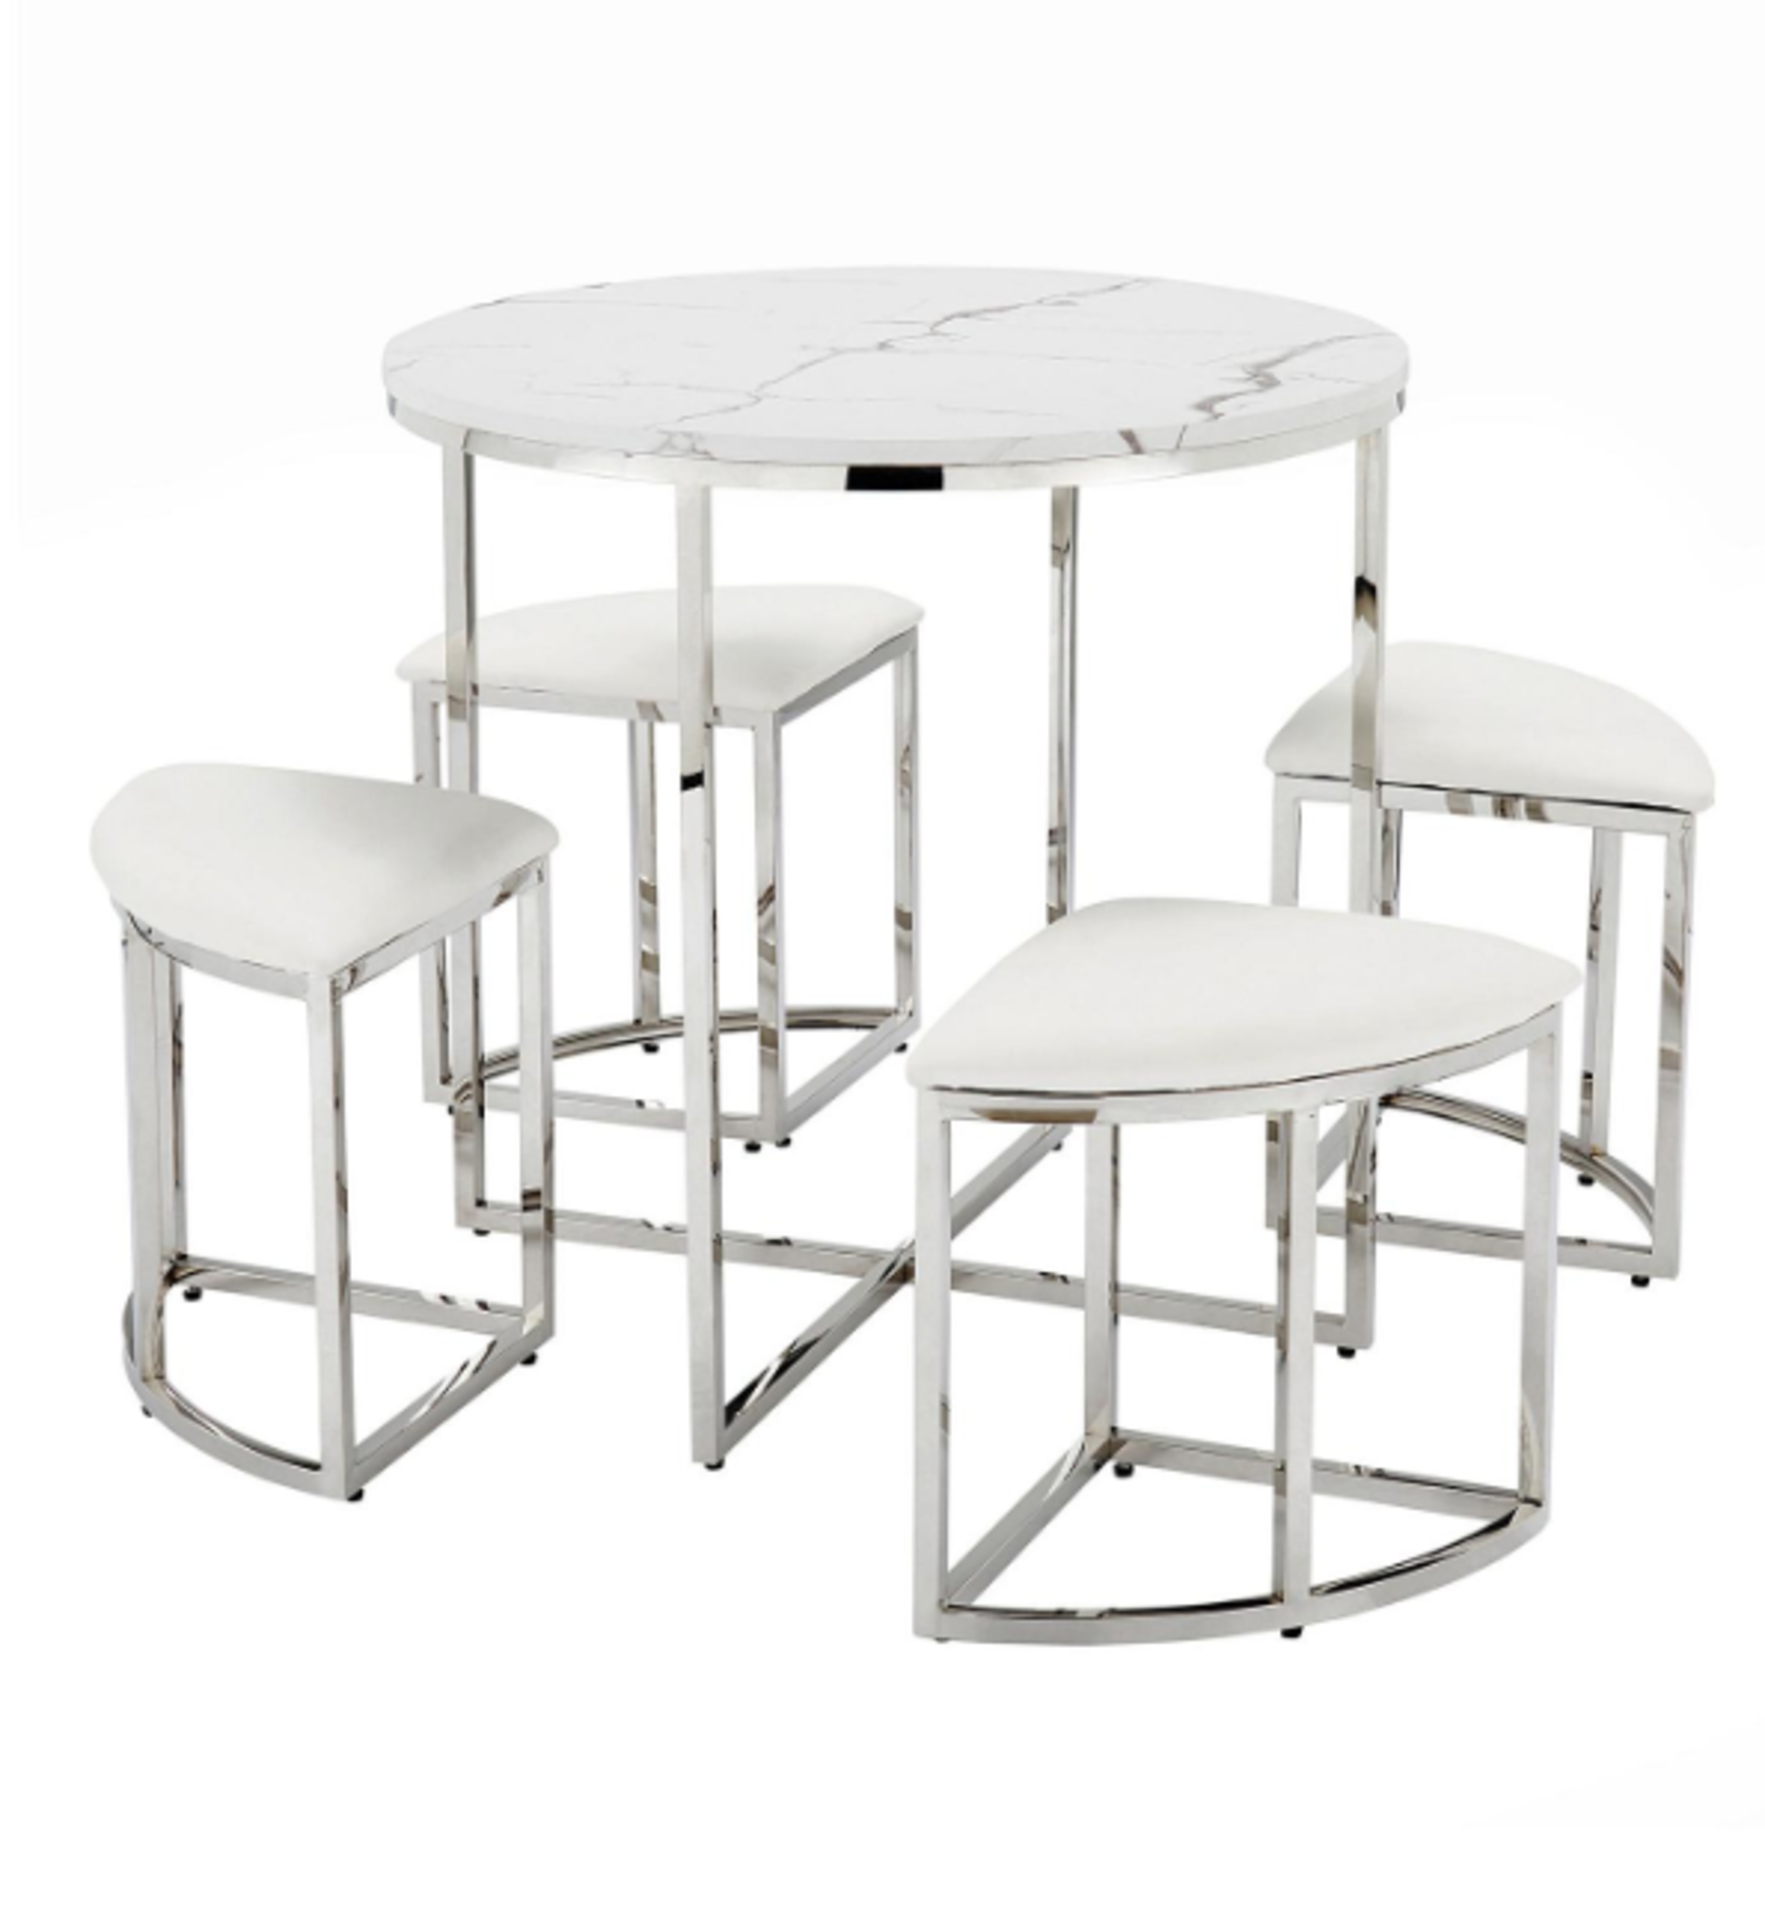 Trade Lot 4 x New & Boxed Milan Hideaway Space Saving Dining Sets. RRP £399 each. If you’re - Image 4 of 5